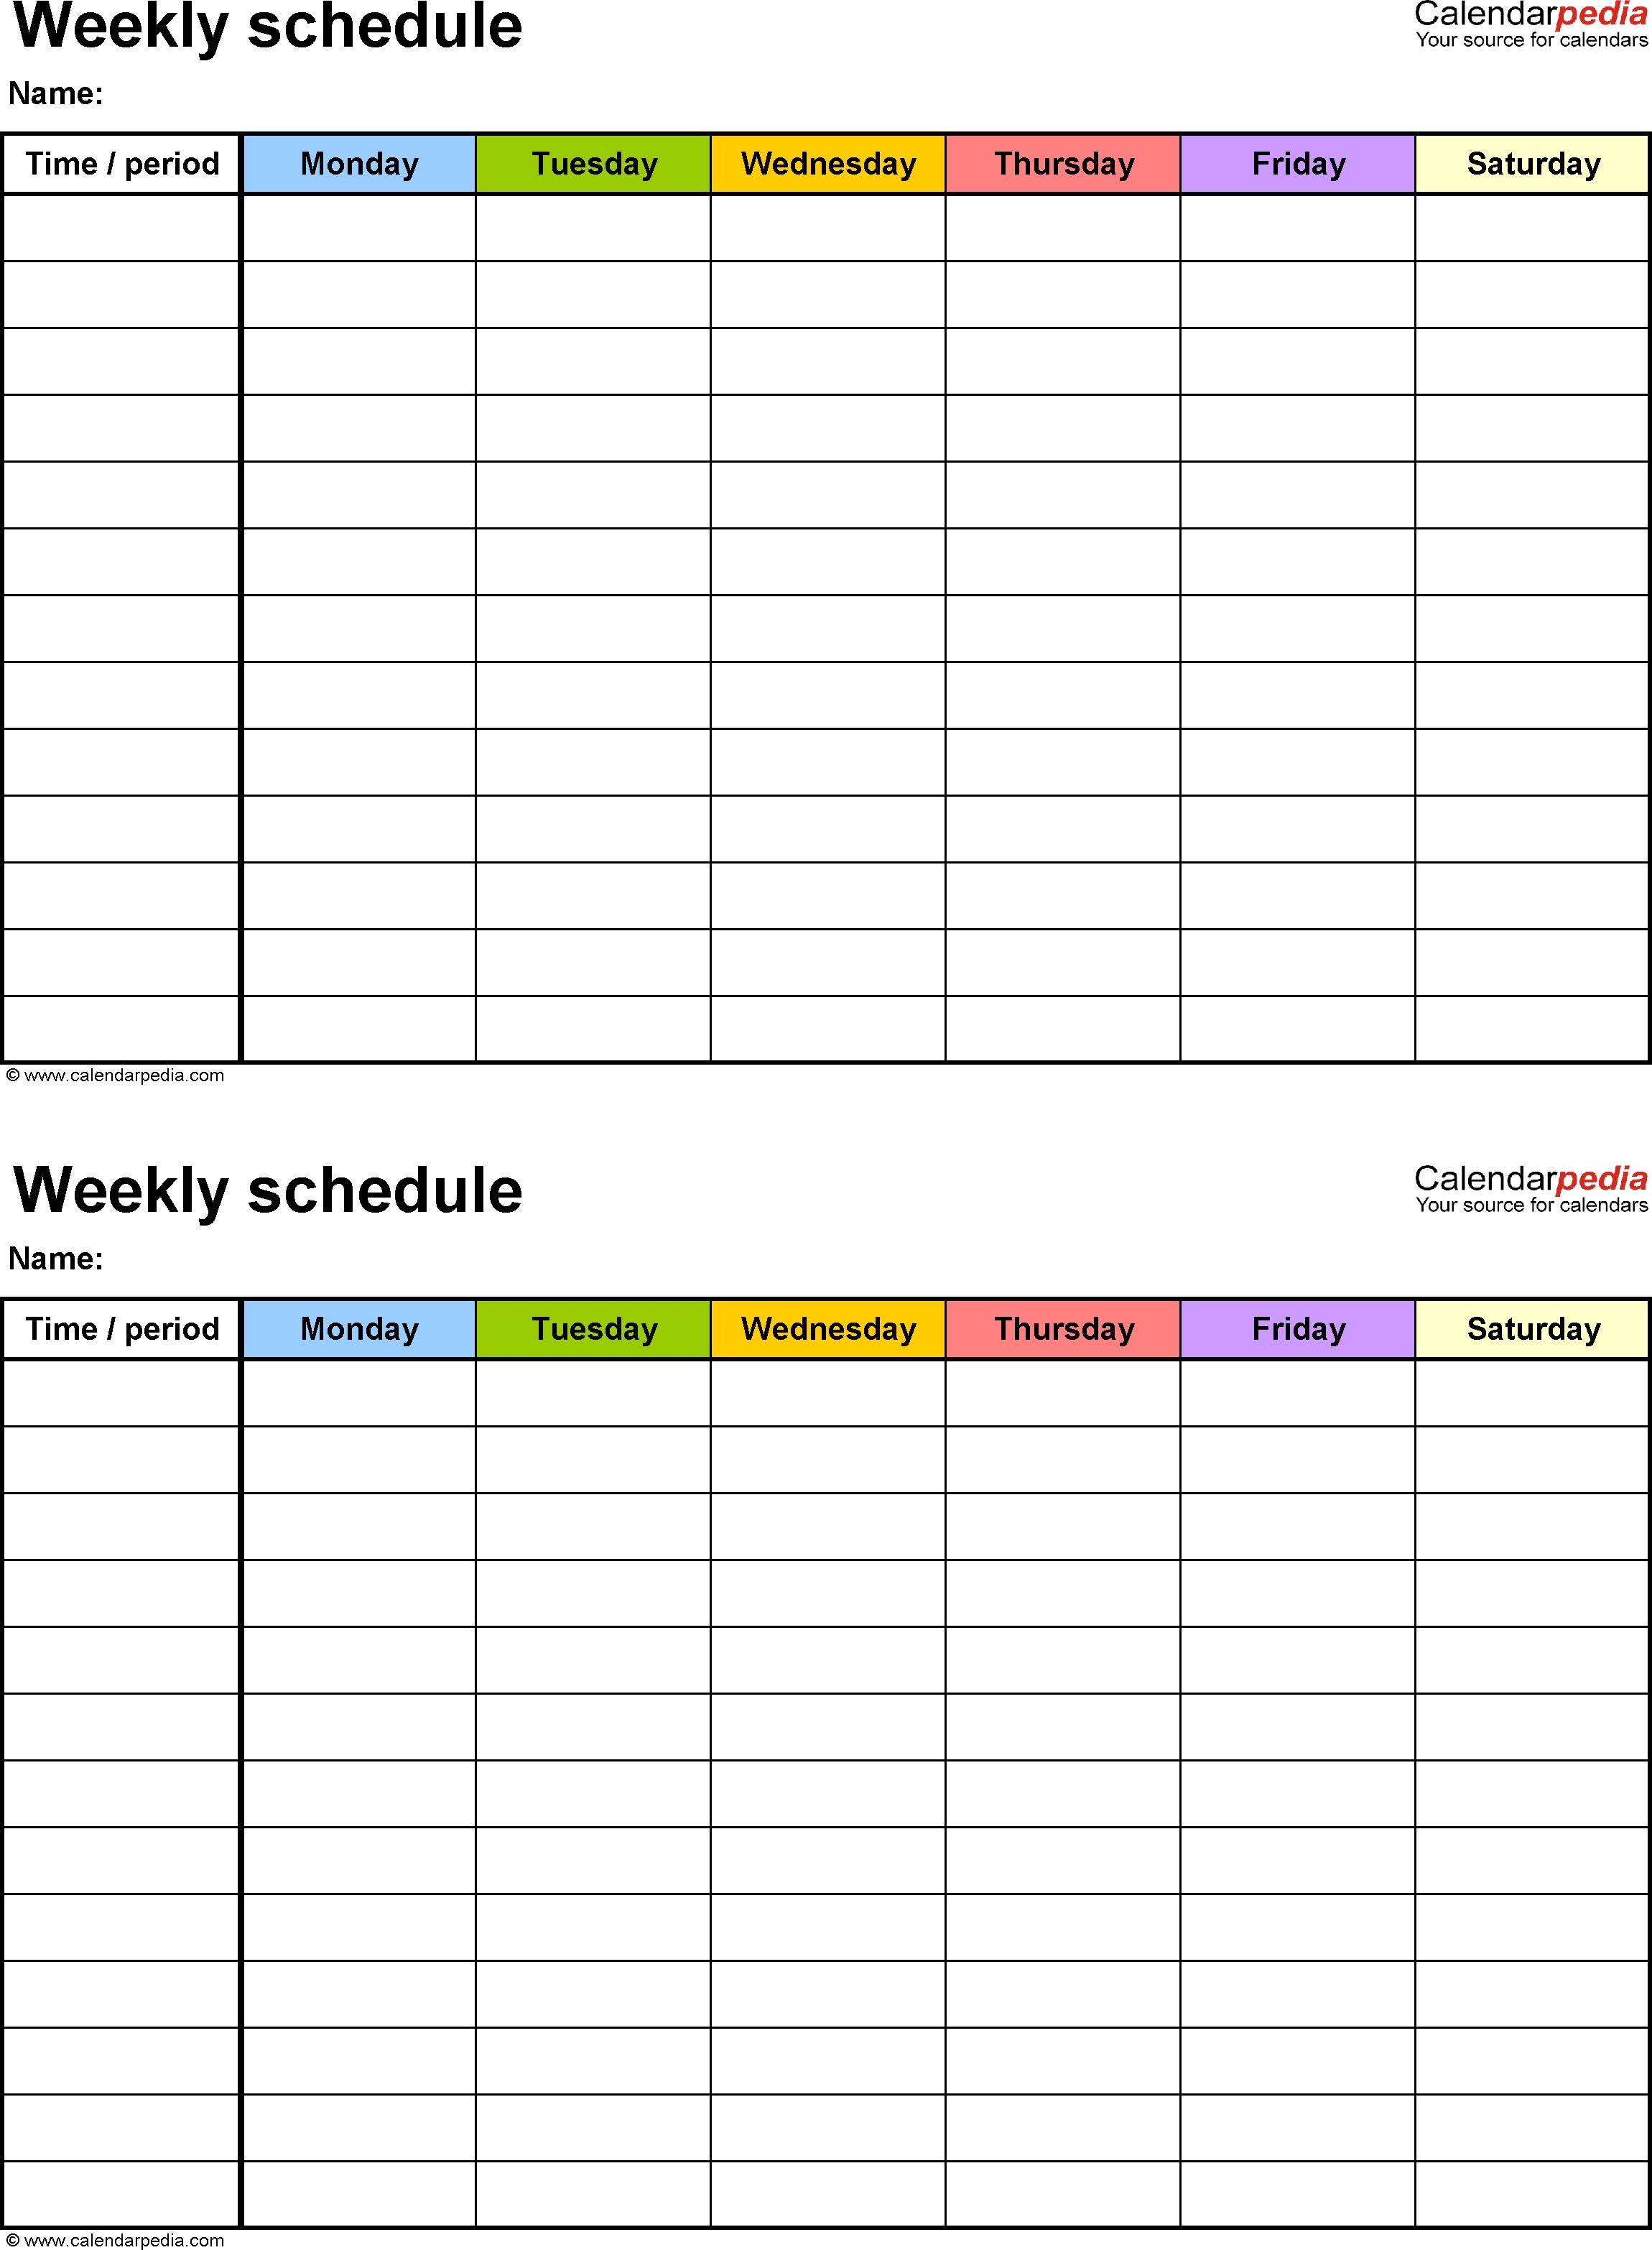 Free Weekly Schedule Templates For Pdf - 18 Templates for Printable Weekly Planner With Times